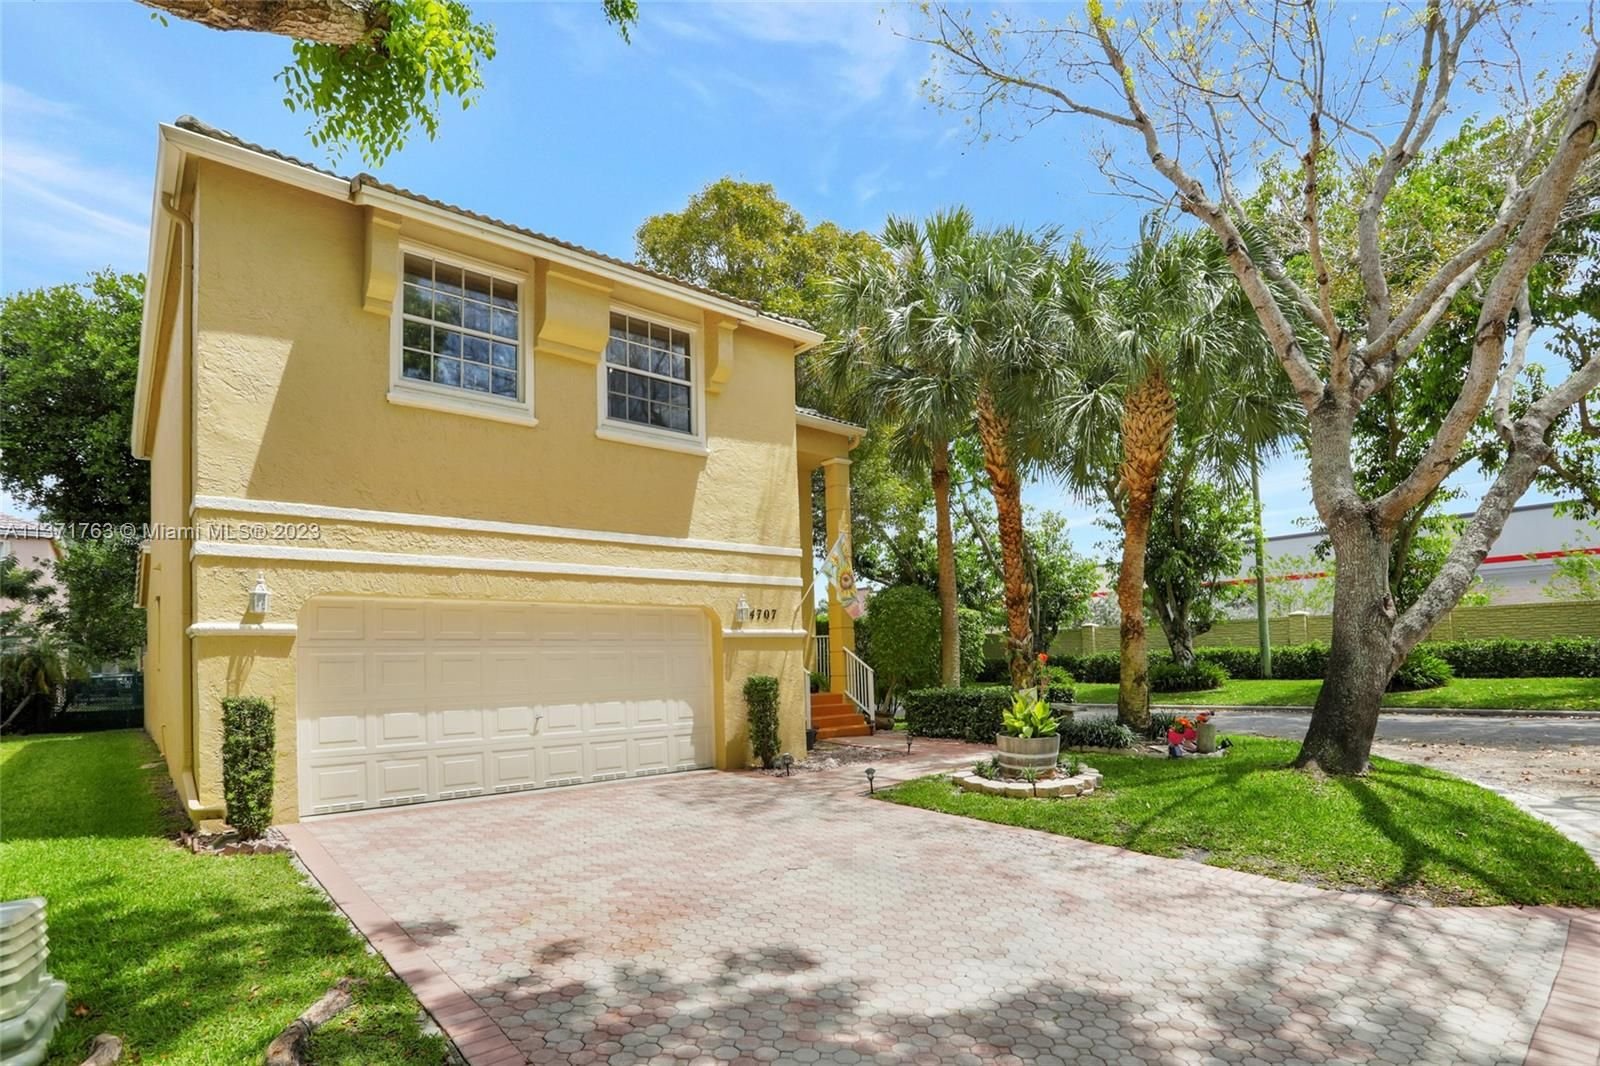 Real estate property located at 4707 114th Ln, Broward County, Coral Springs, FL